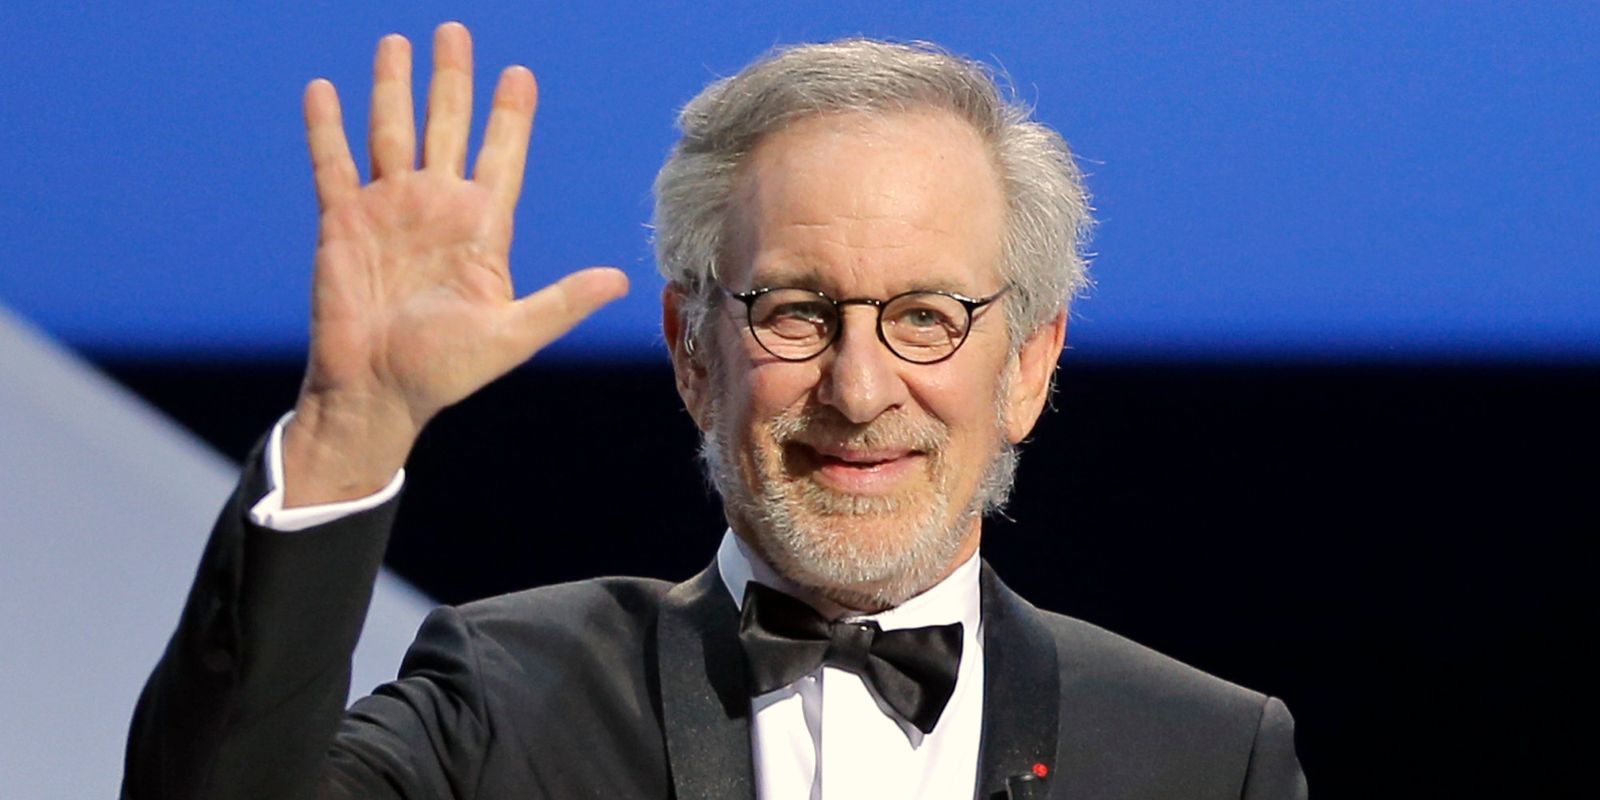 Next Project For Steven Spielberg, A Romantic Comedy?